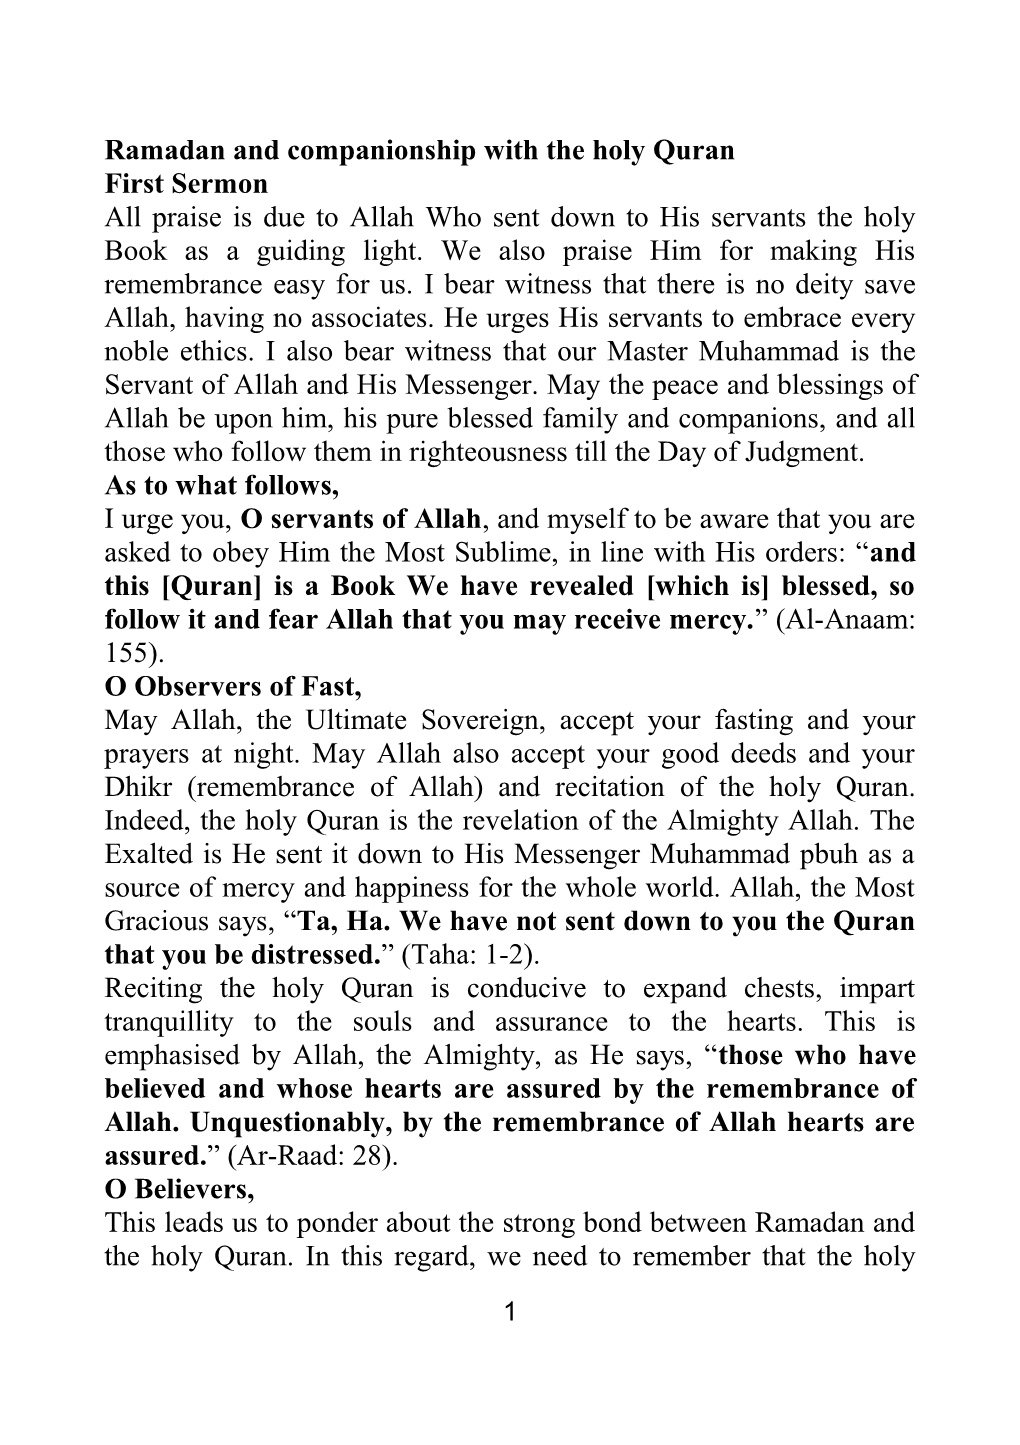 Ramadan and Companionship with the Holy Quran